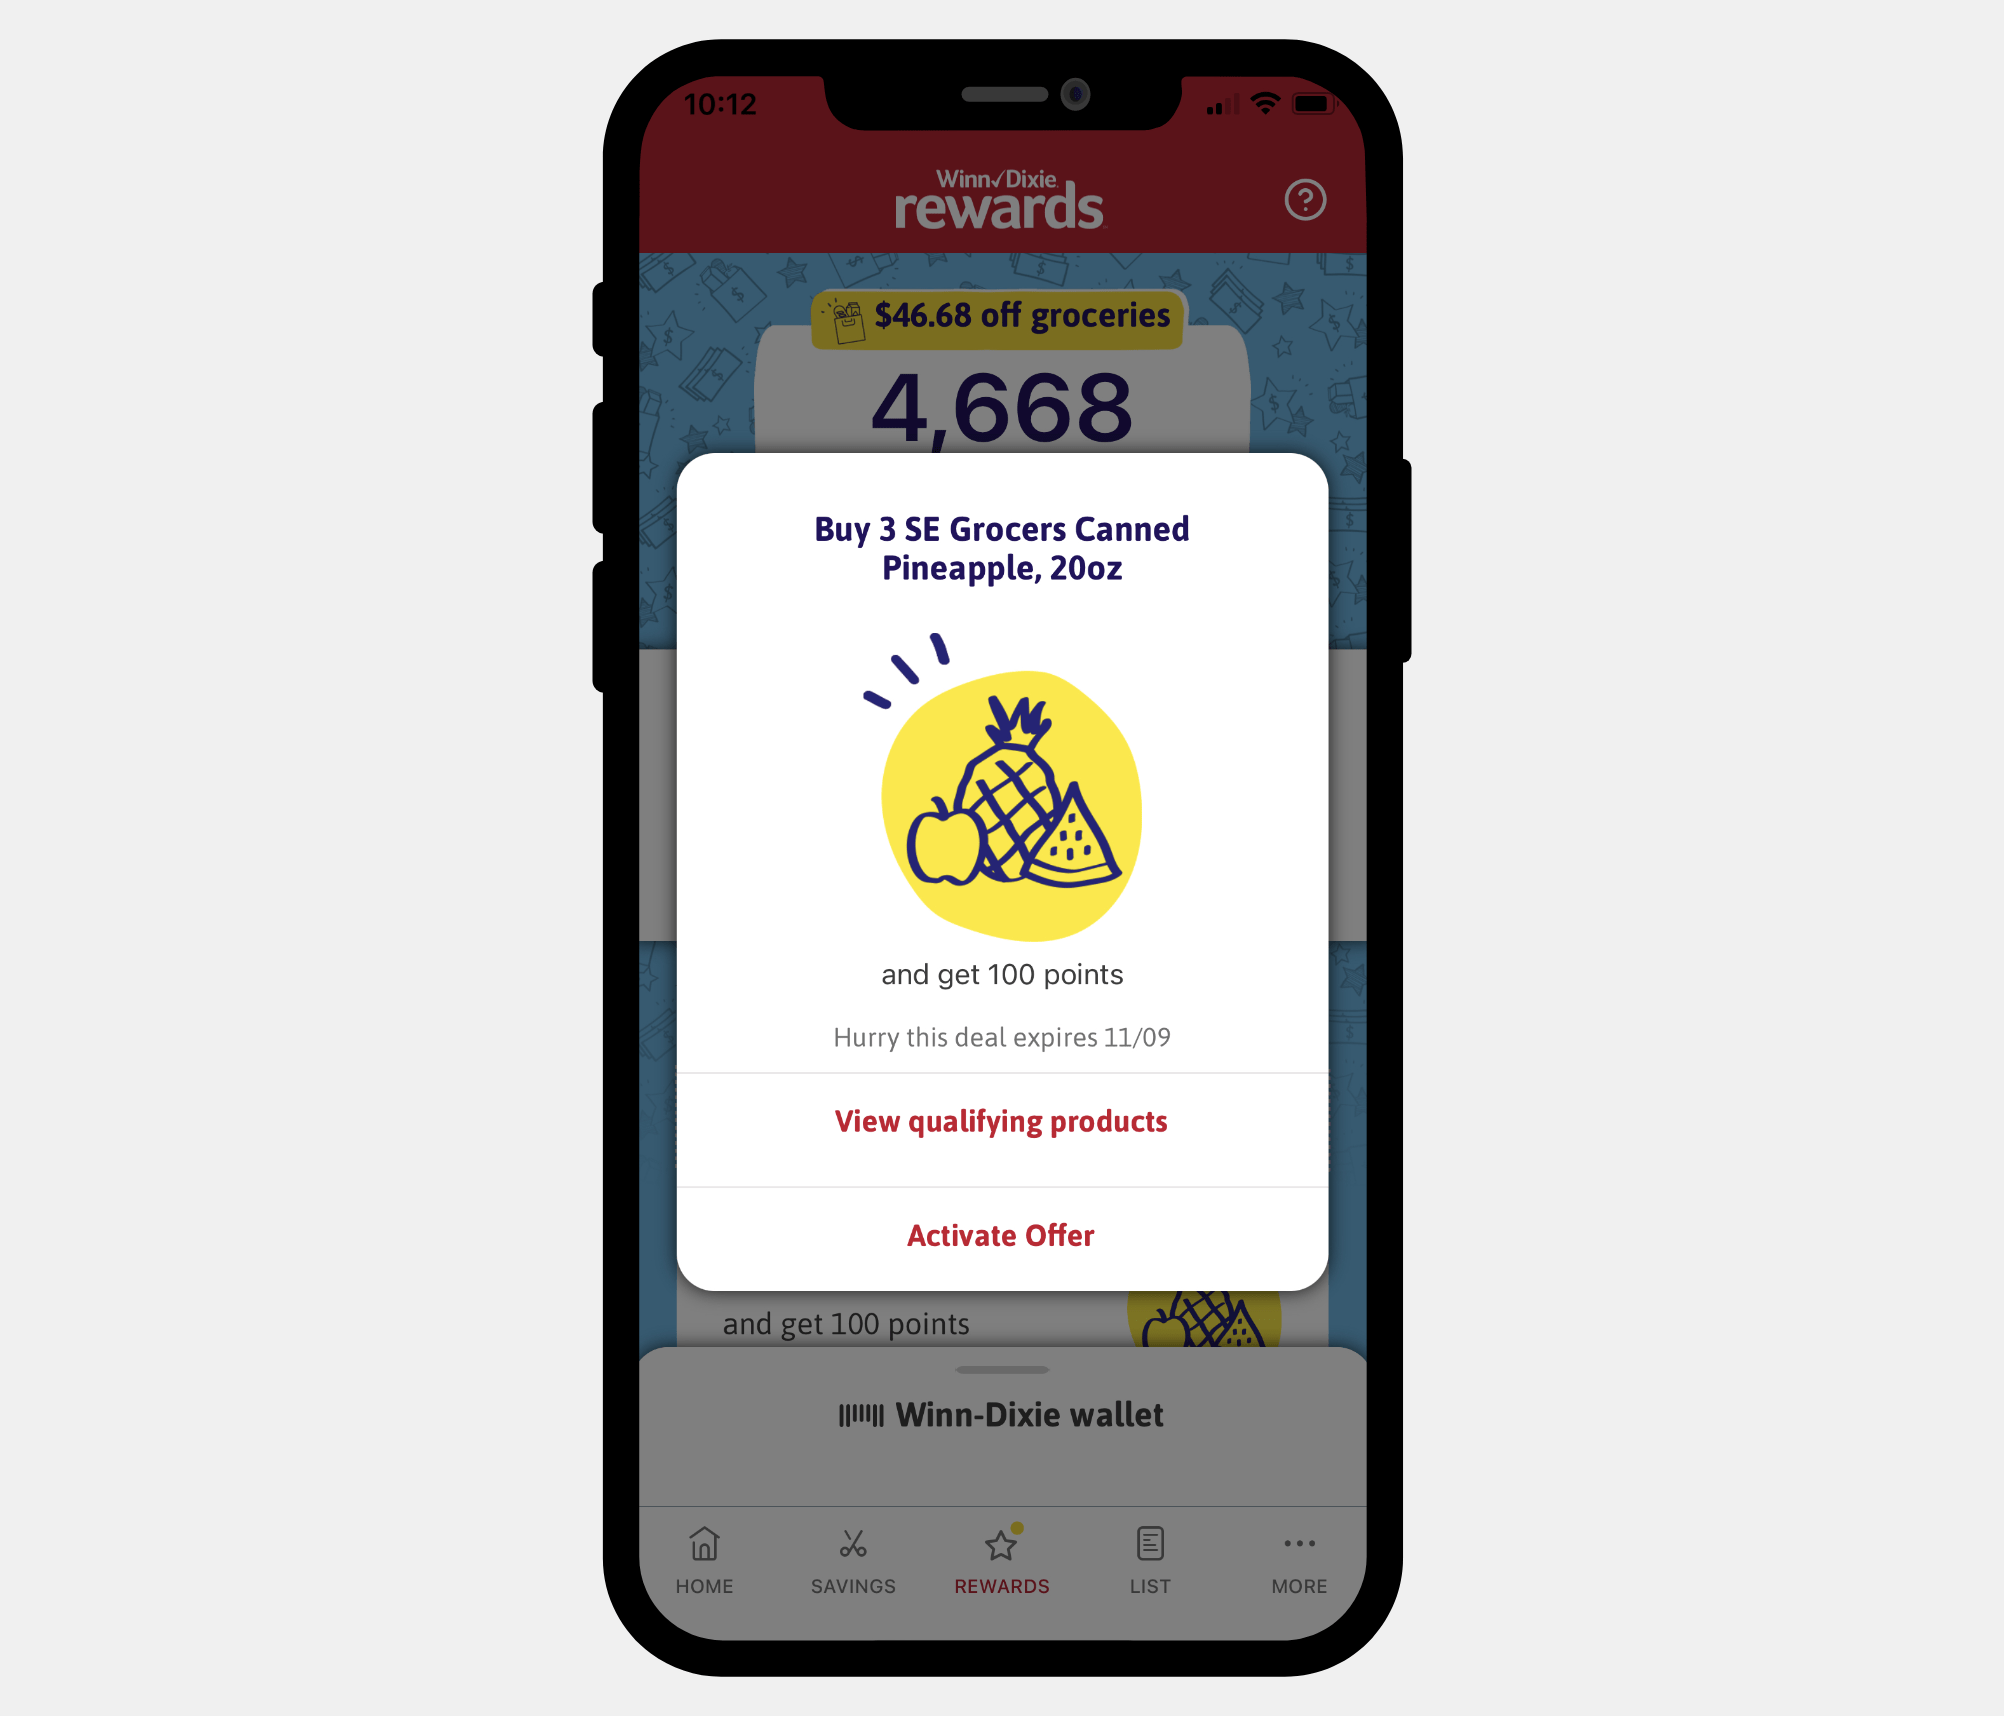 Image of the rewards offers feature on the Winn-Dixie app